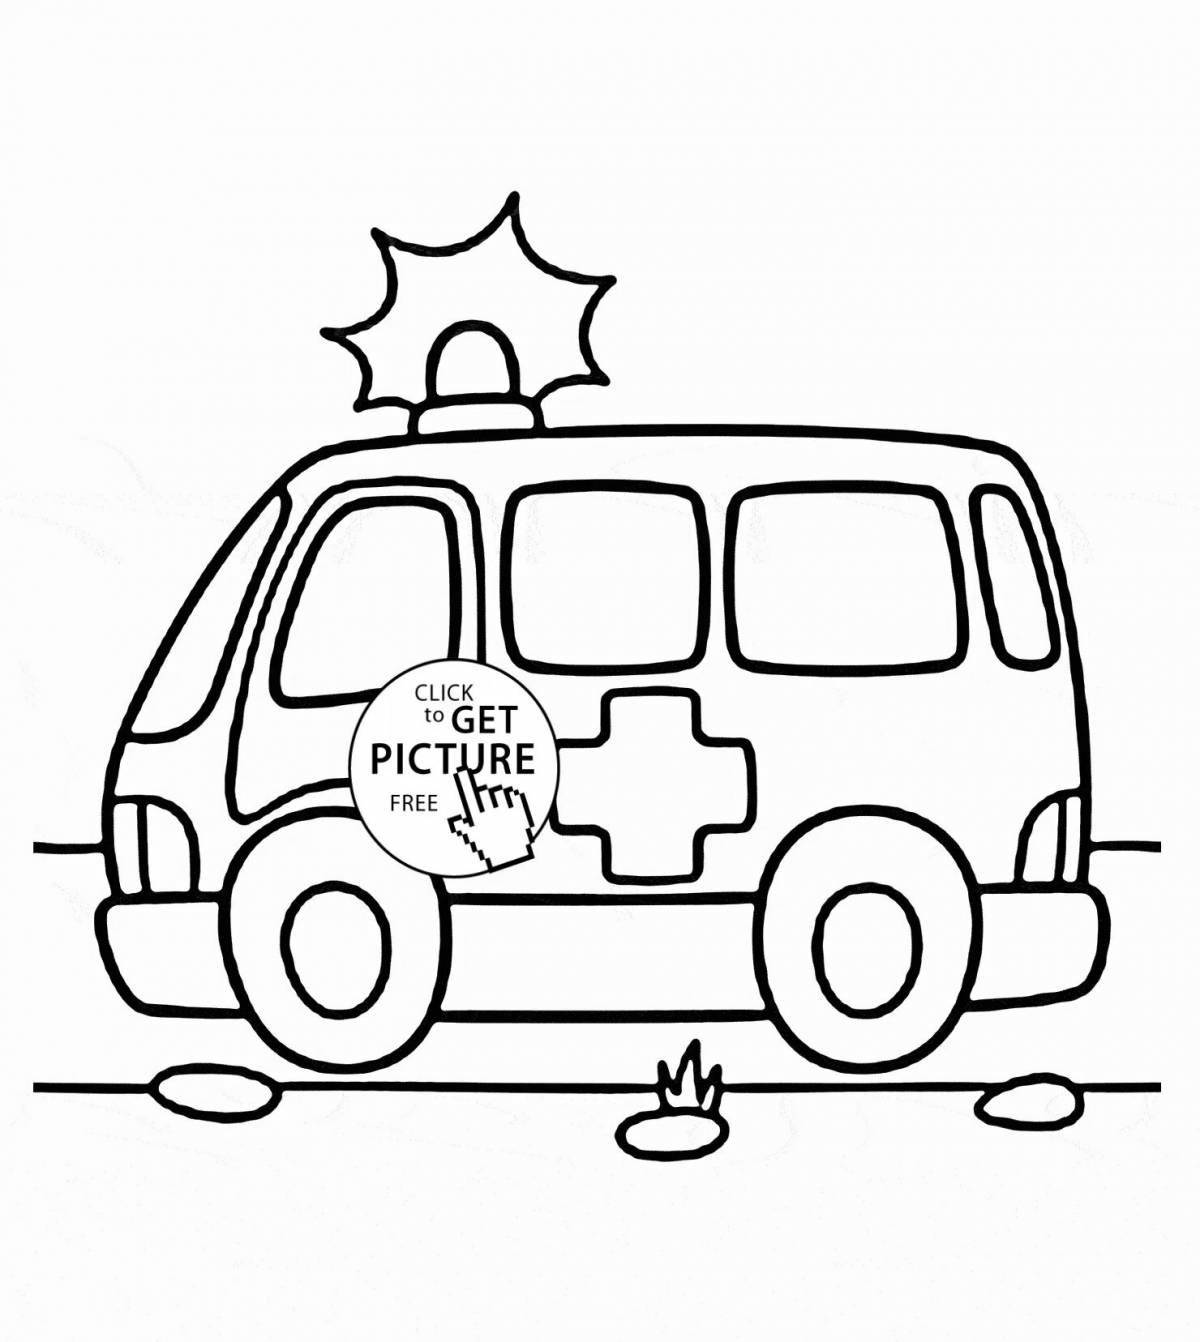 Ambulance fun coloring book for 3-4 year olds